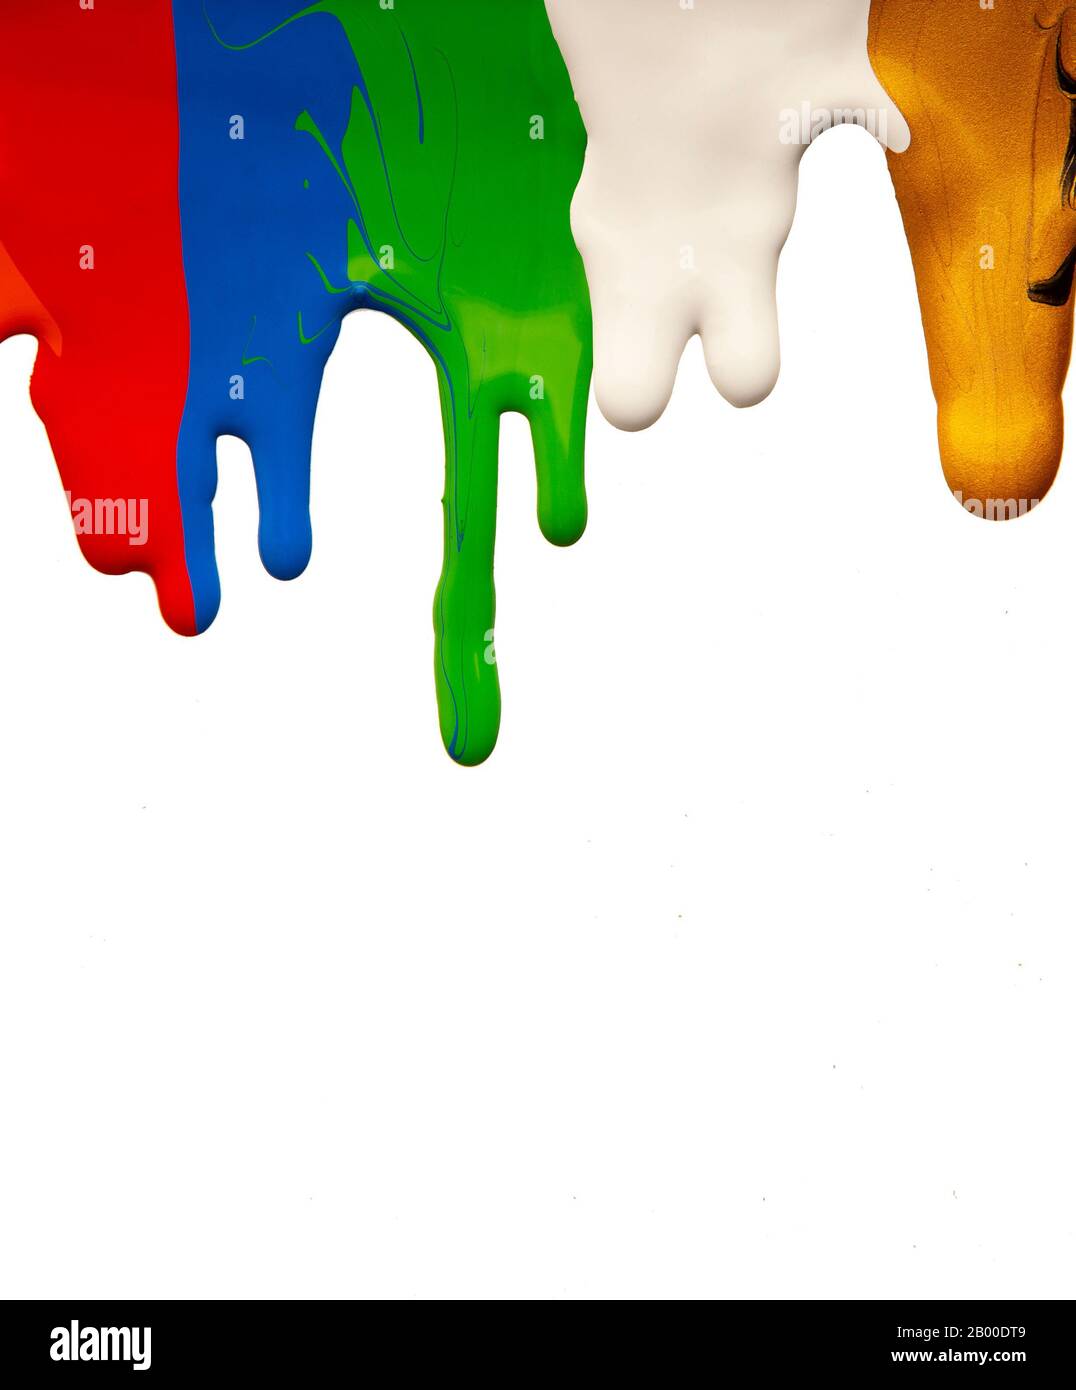 Colored paints dripping isolated over white background Stock Photo